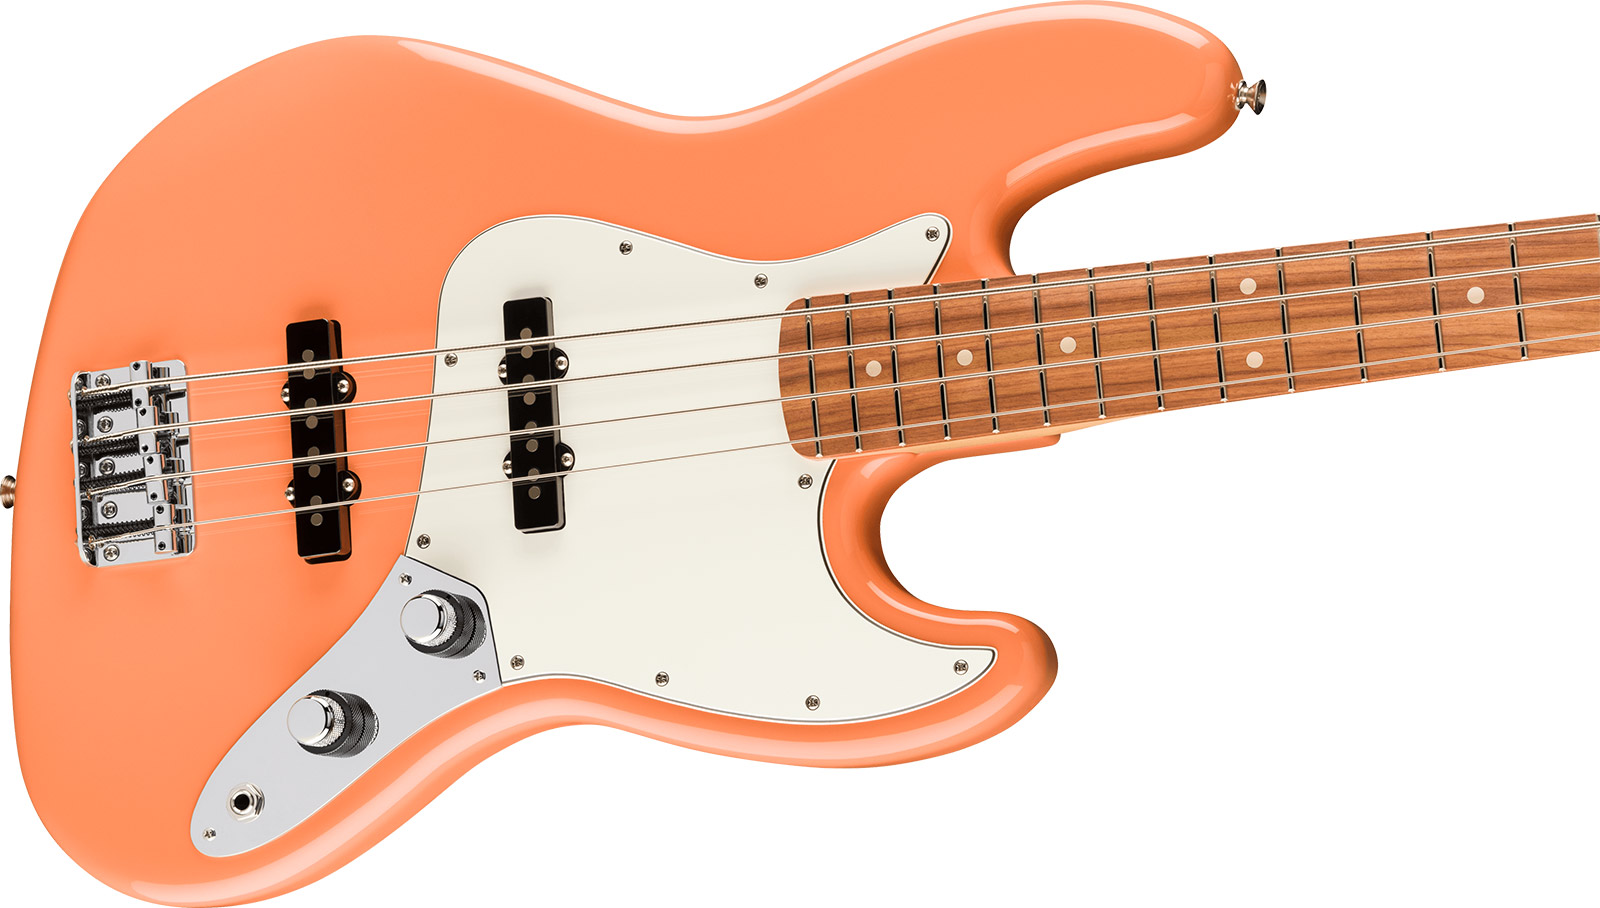 Fender Jazz Bass Player Mex Ltd Pf - Pacific Peach - Solid body electric bass - Variation 2